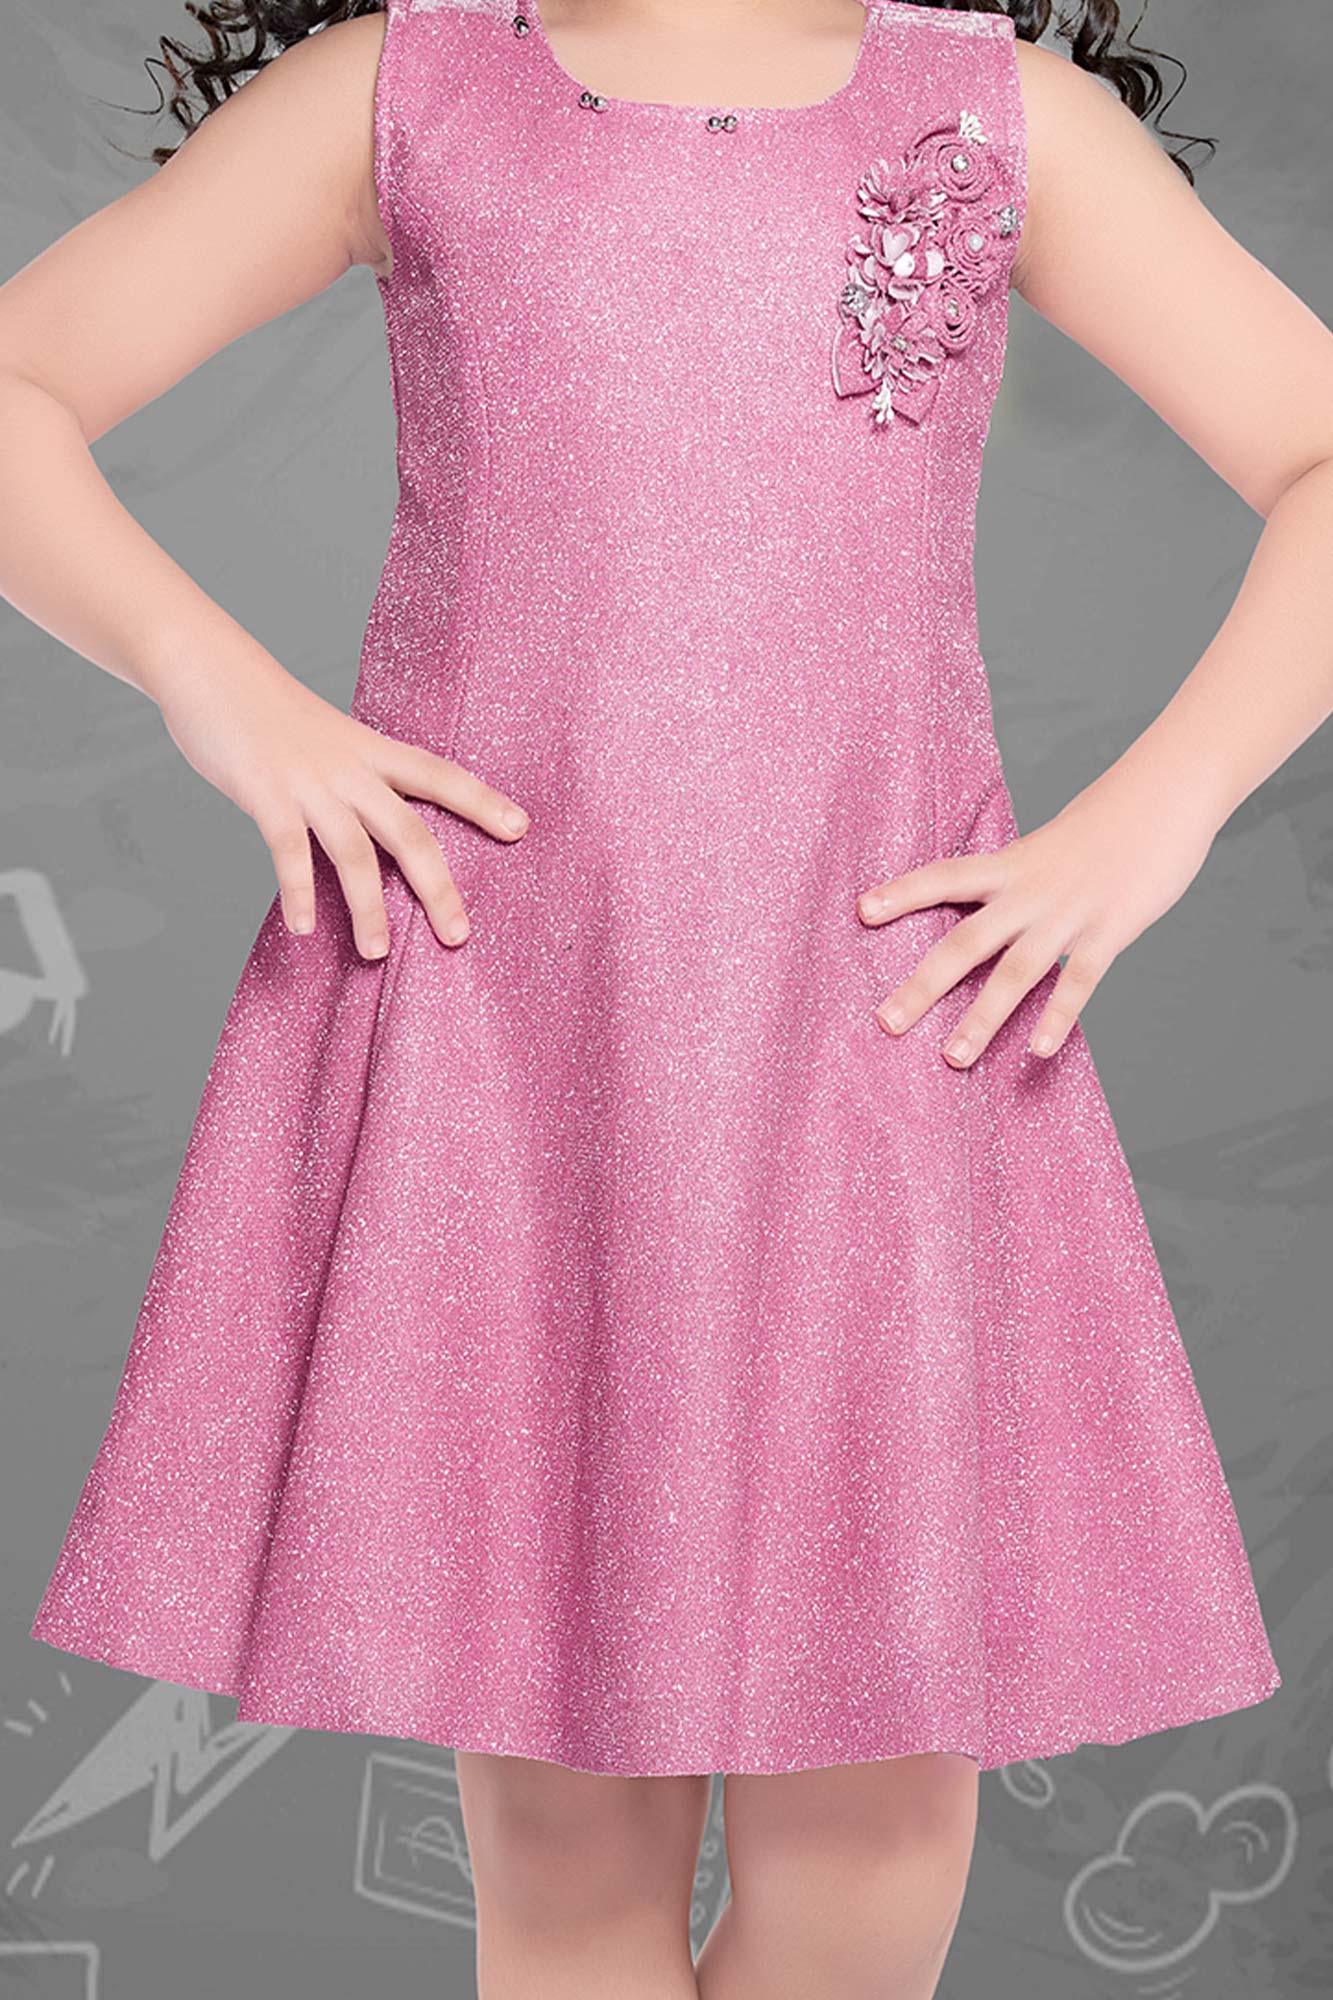 Enchanting Blush Pink Frock with Delicate Neckline for Kids - Lagorii Kids